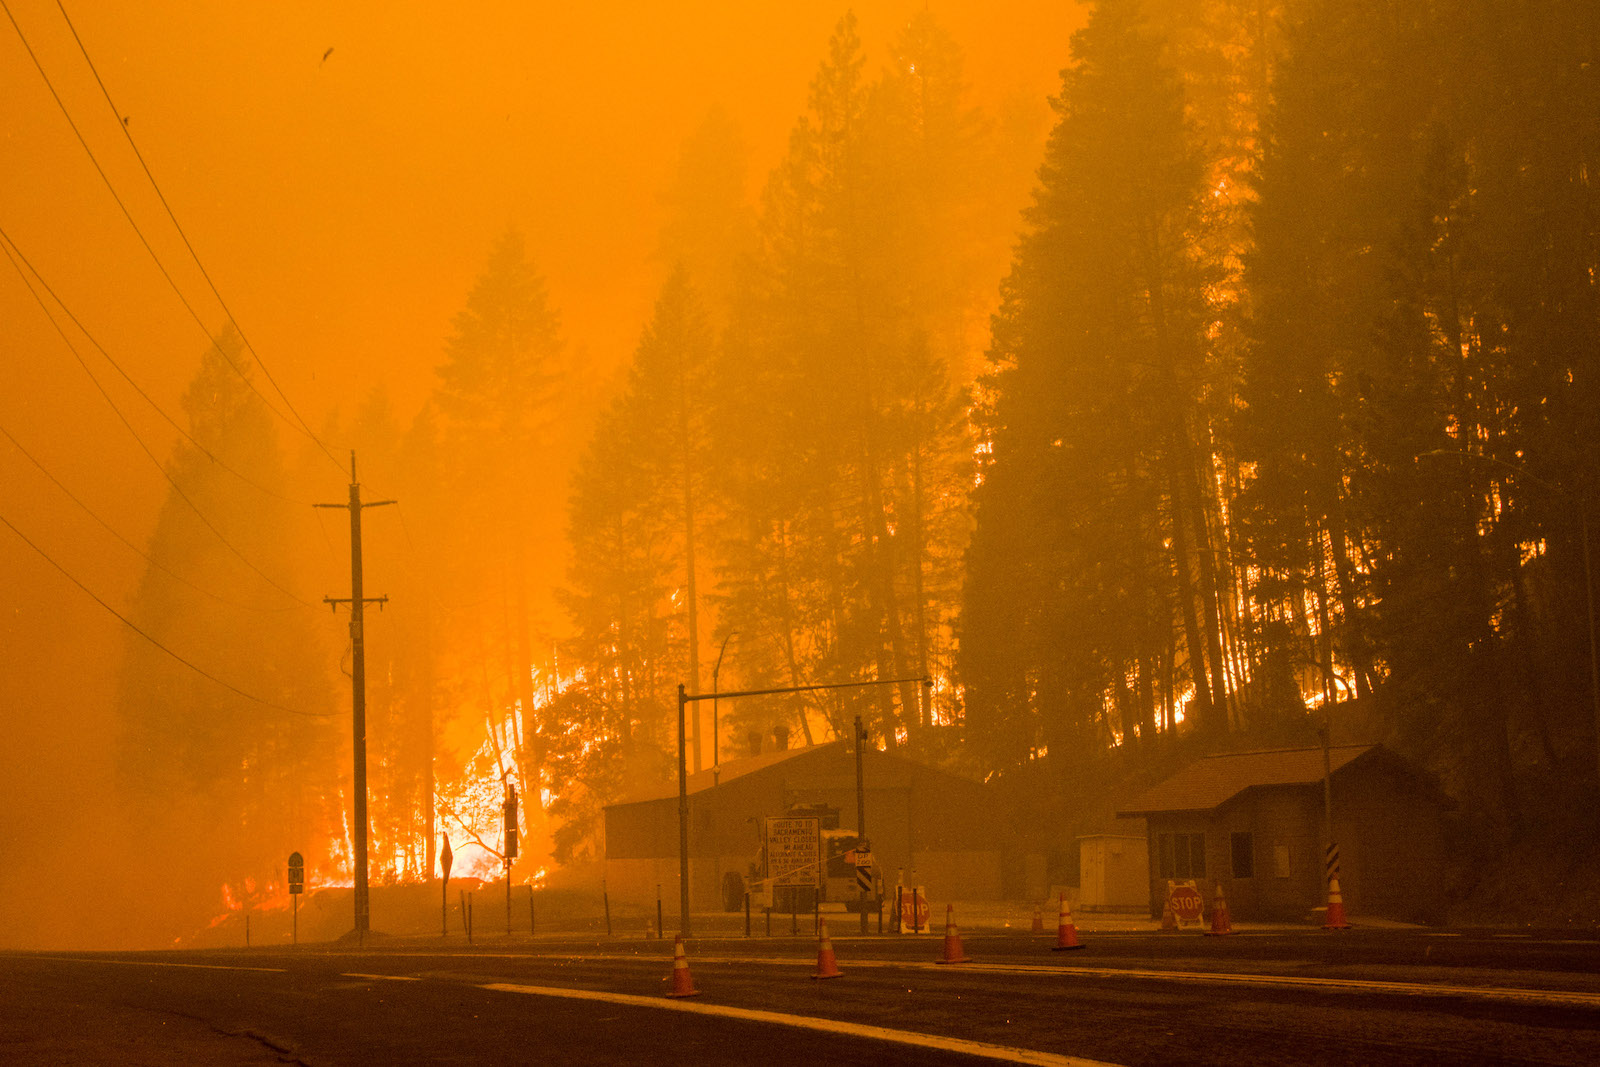 A highway with traffic cones and house-like buildings on the side of the road. Large wildfire flames engulf nearby trees. The whole scene is a burnt orange color due to smoke.